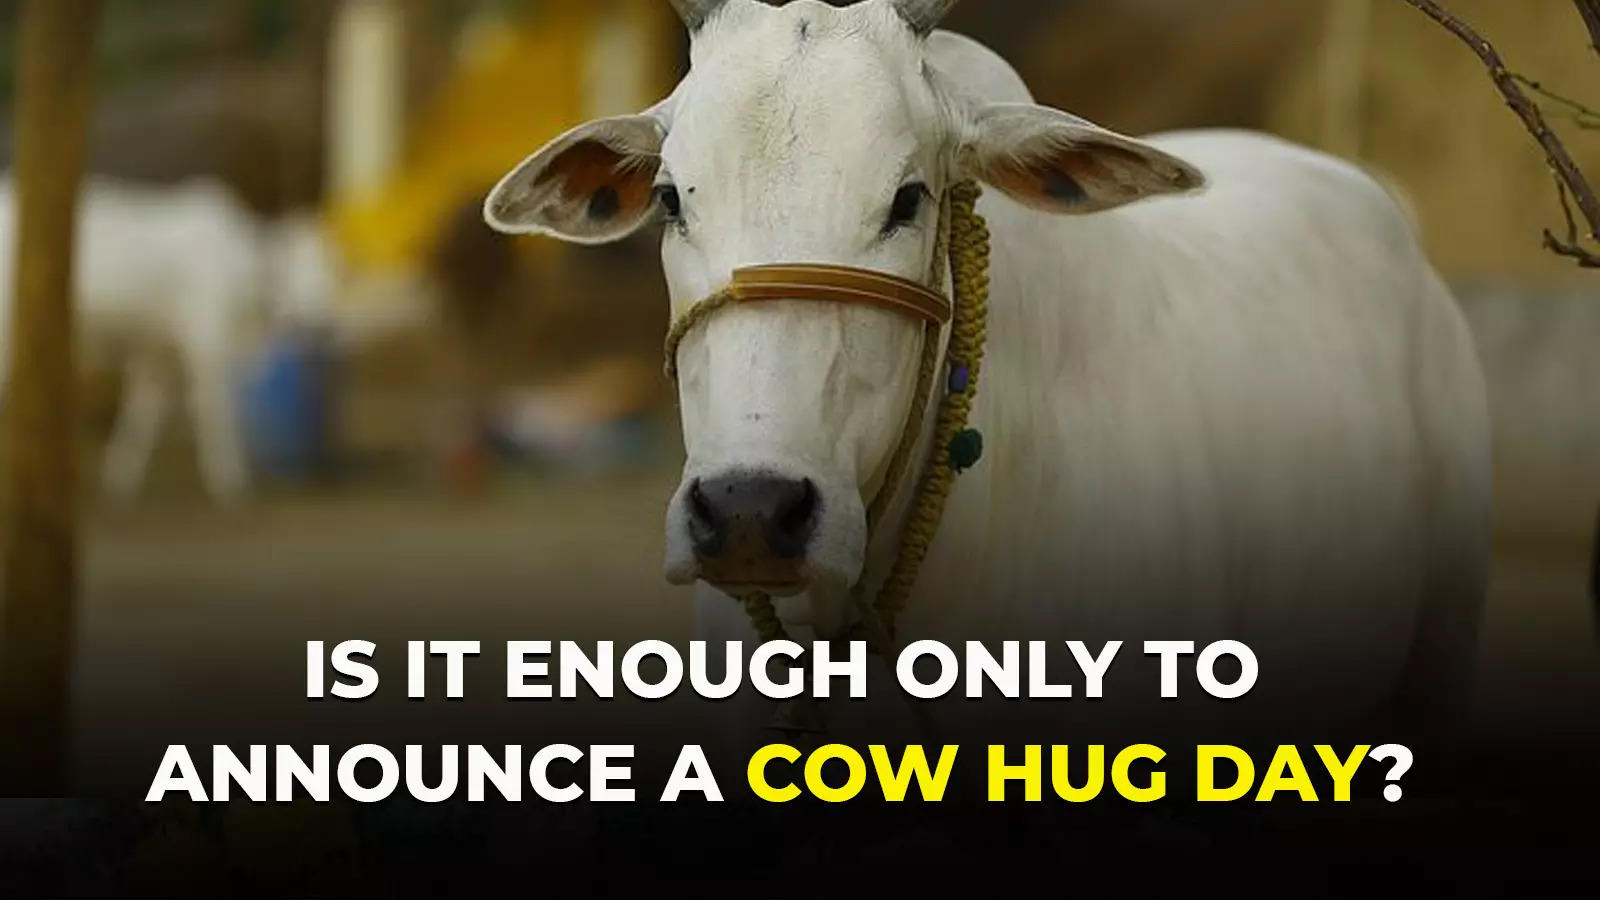 cow hug day: Video Cow hug day: Does the cow need more care in ...